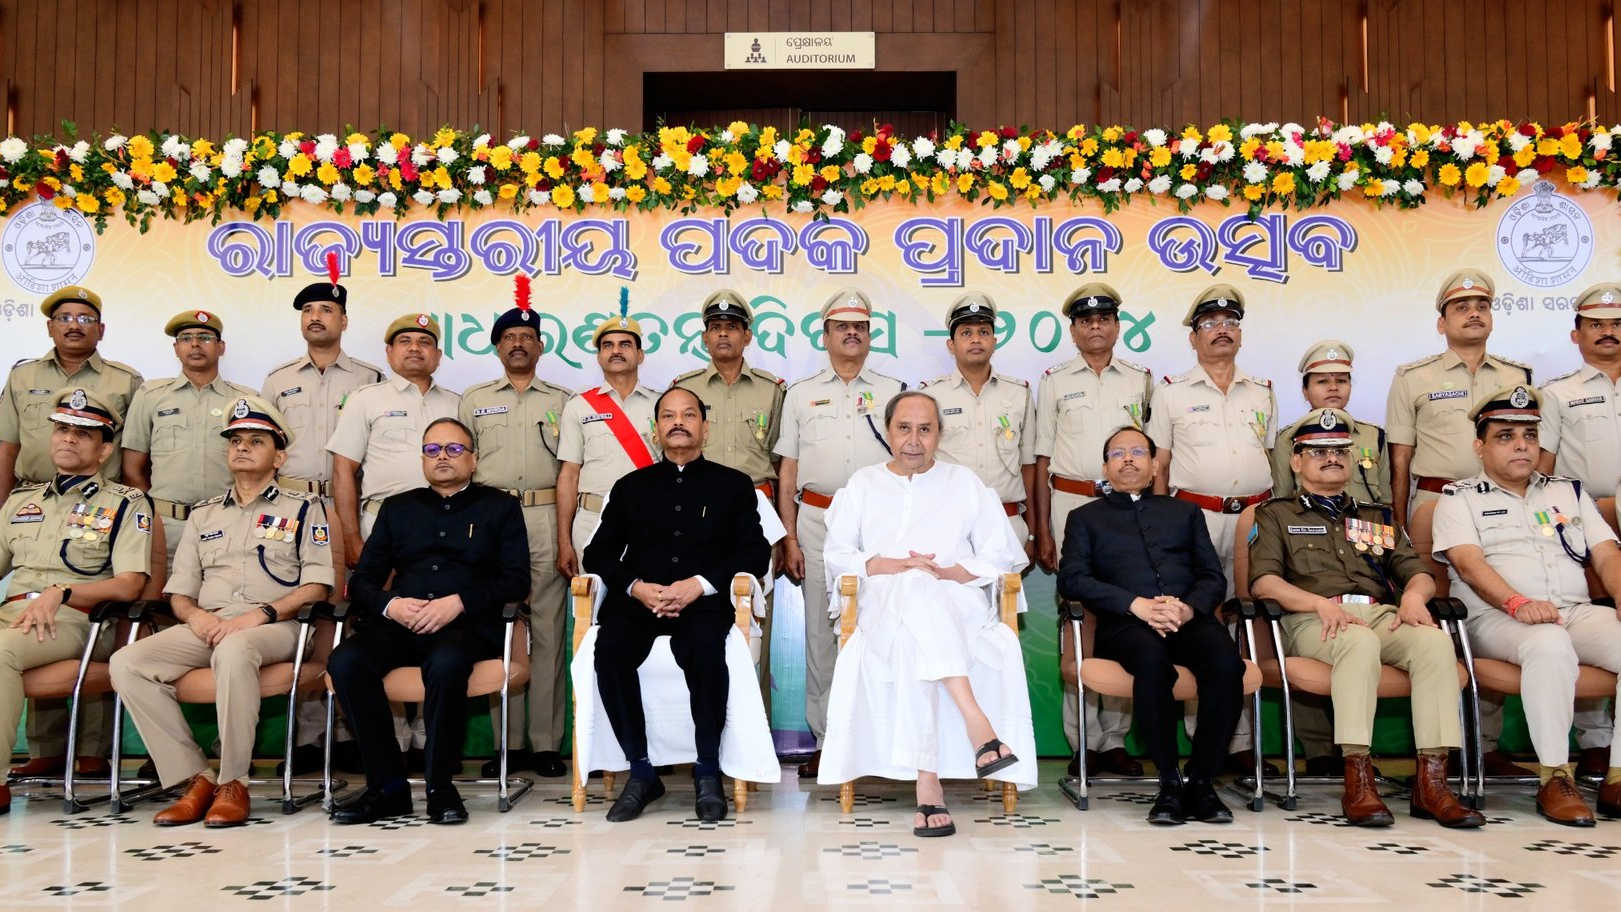 Odisha GUV confers 50 police personnel with services medals on 75th Republic Day